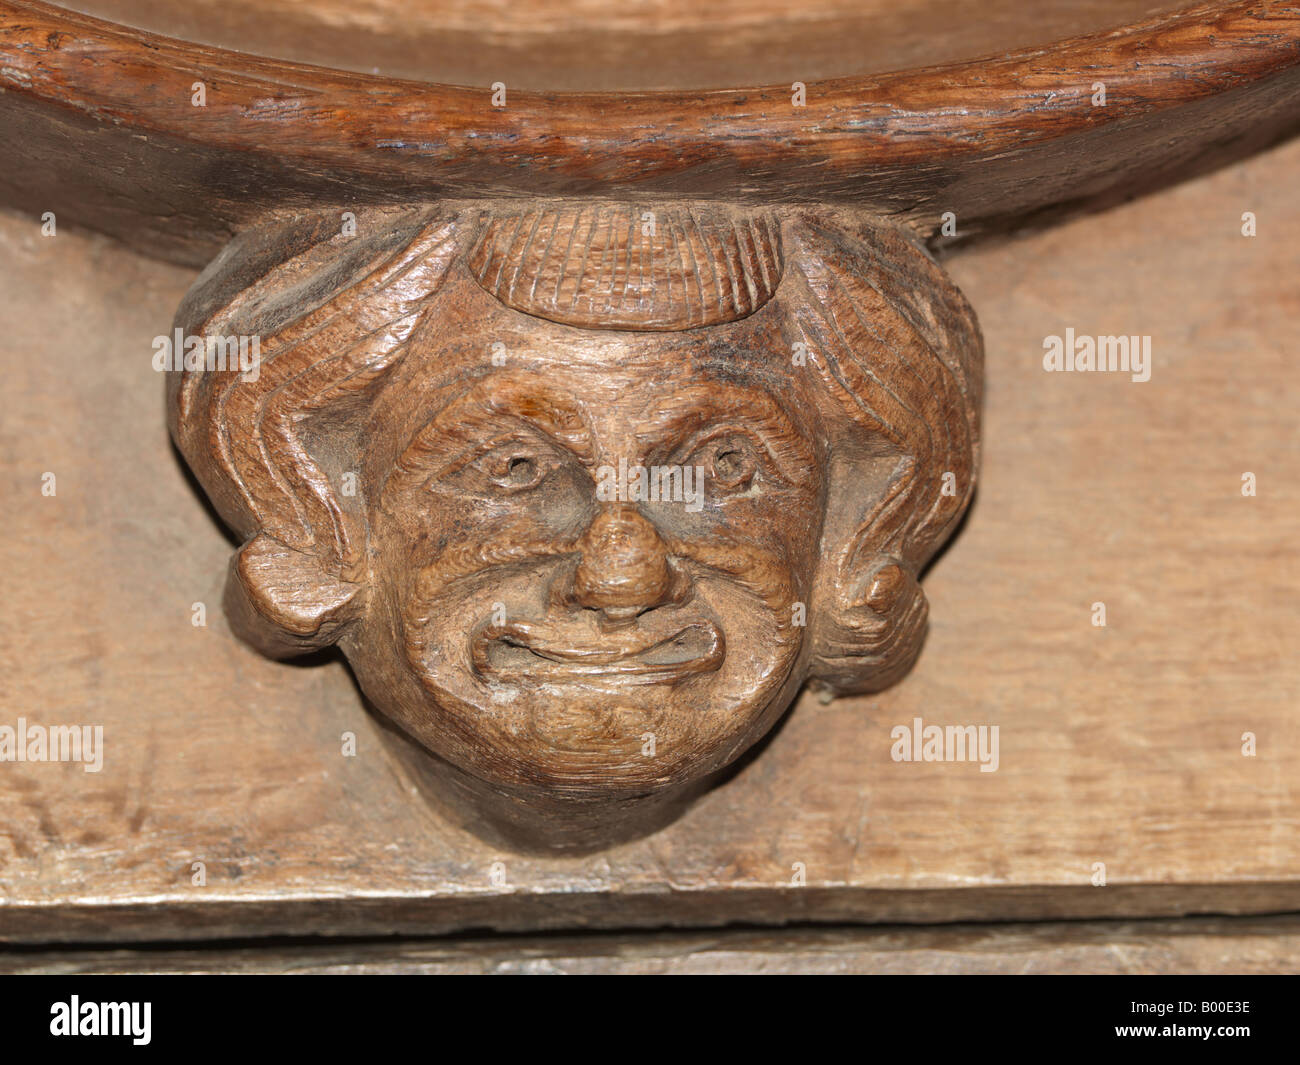 Winchester Cathedral Misericord Detail in the Quireiling Face Stock Photo